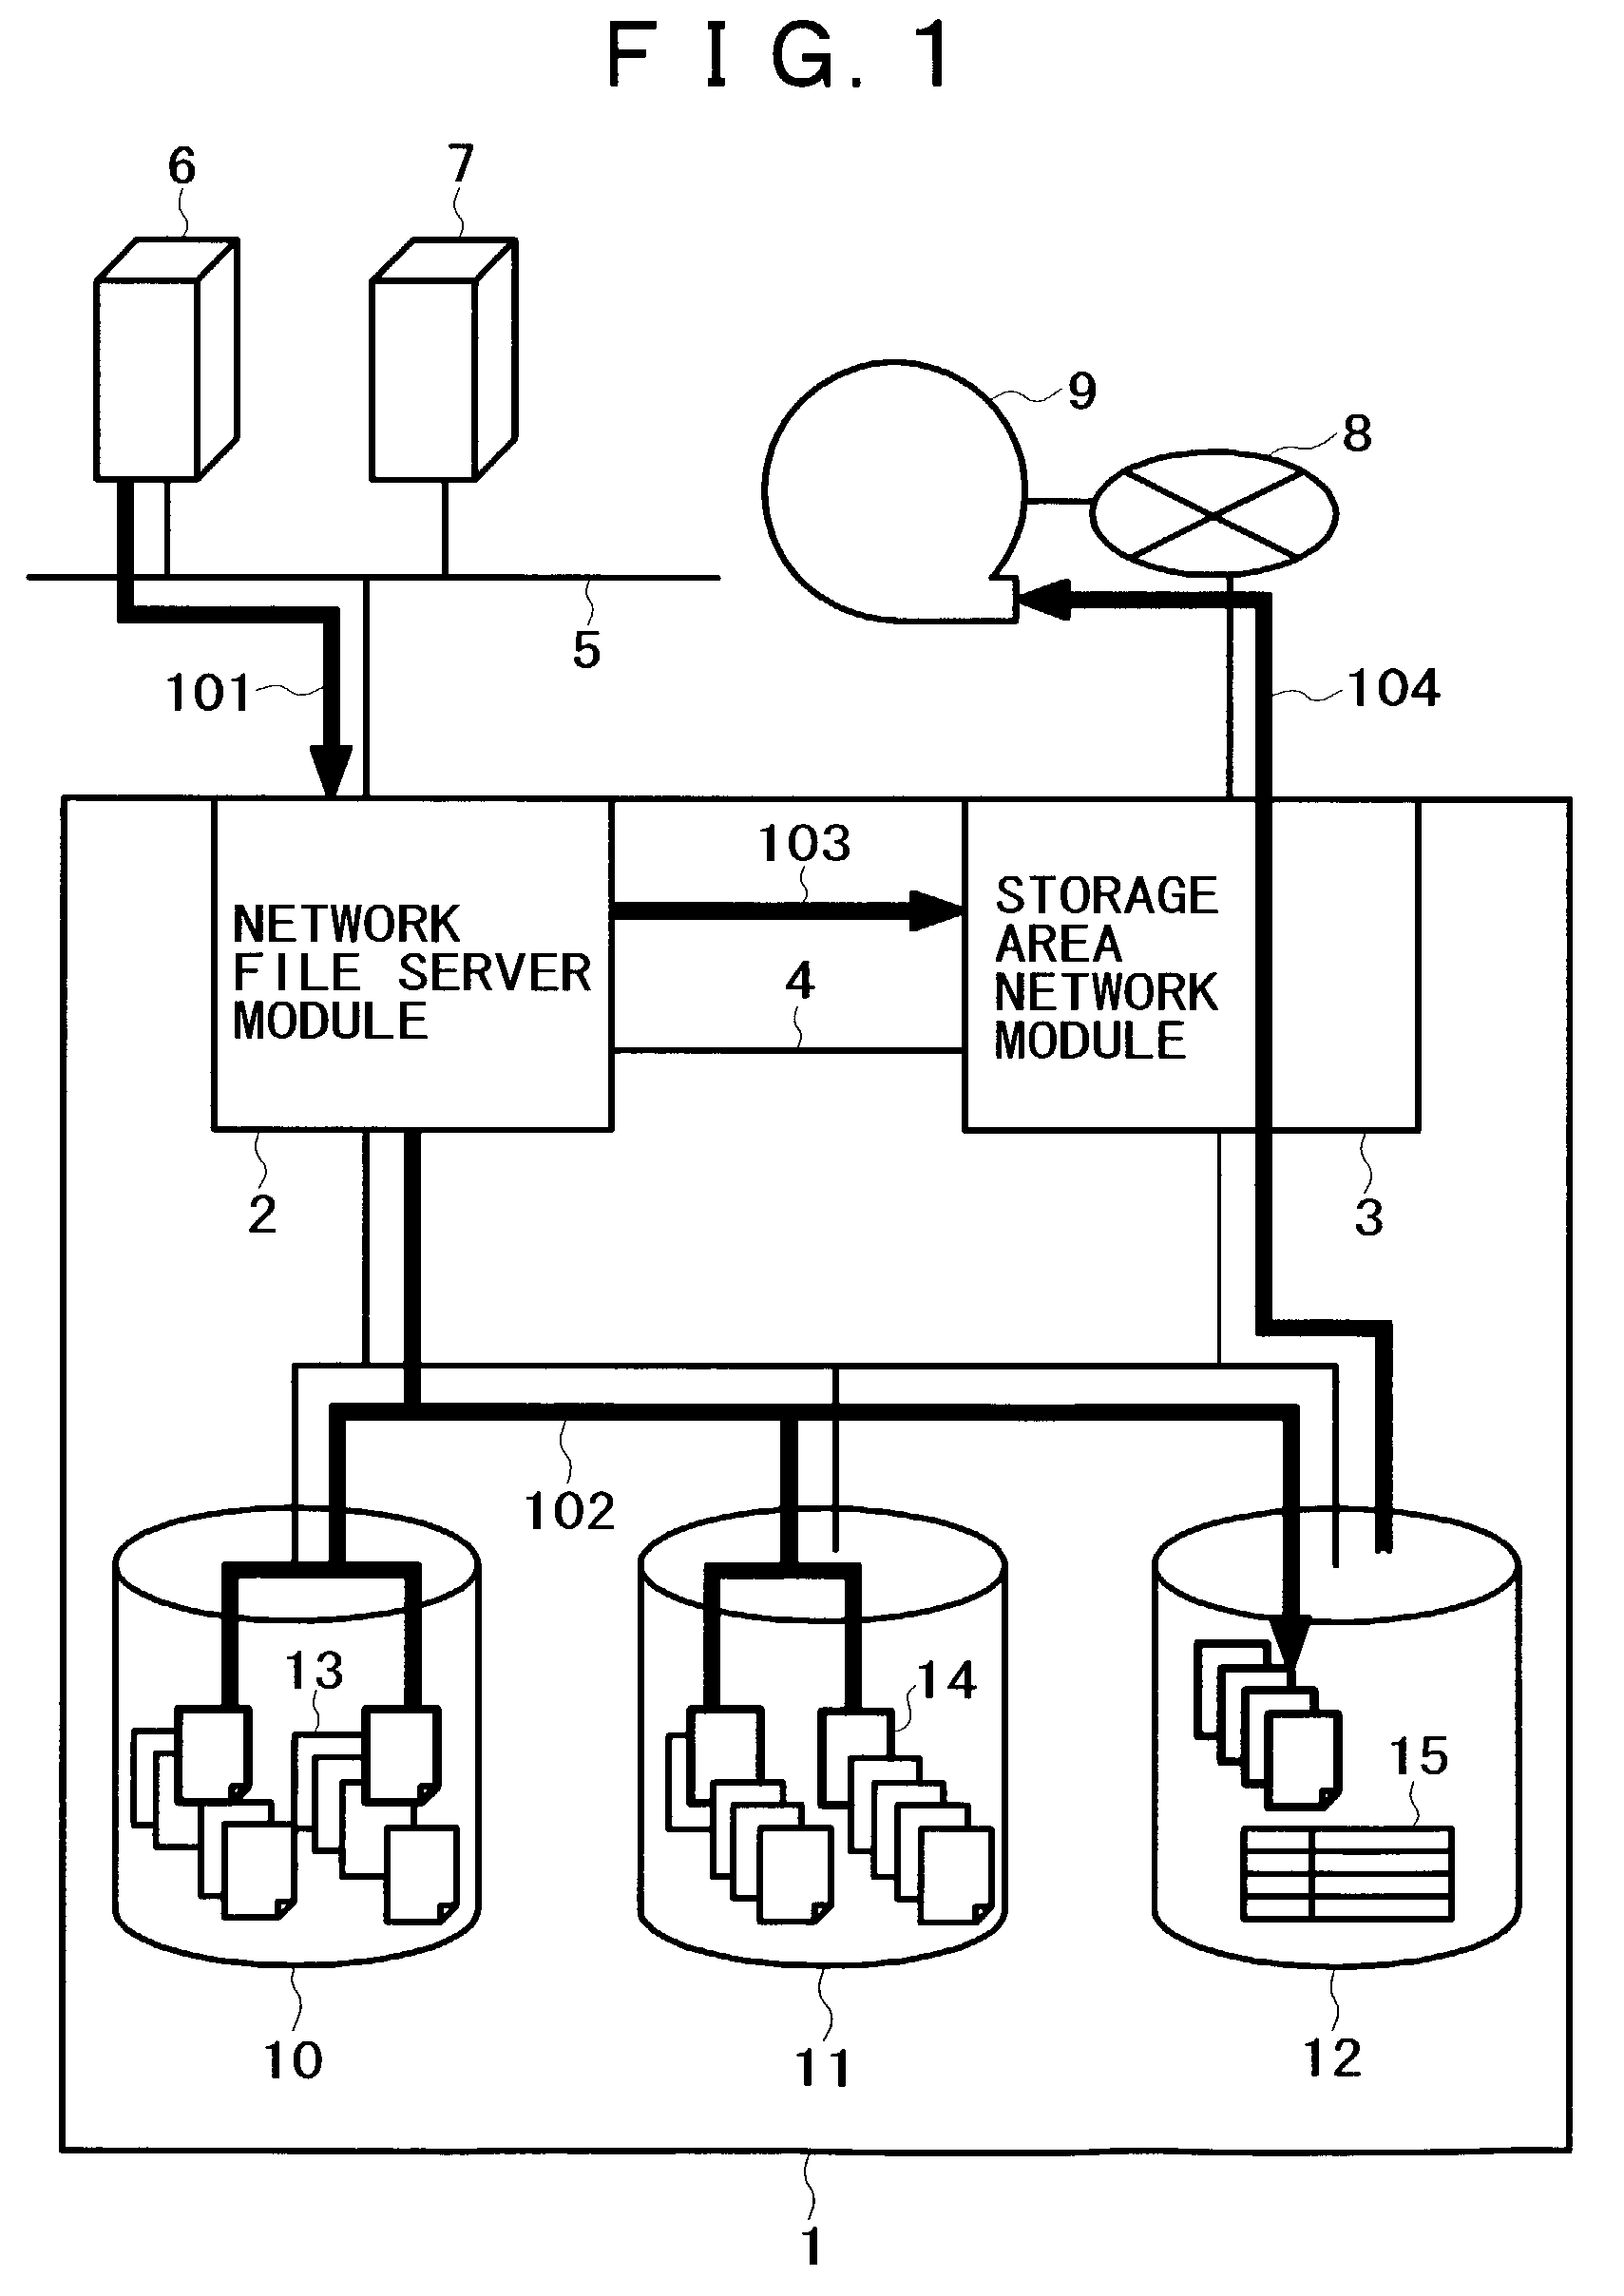 Method for backing up a disk array system